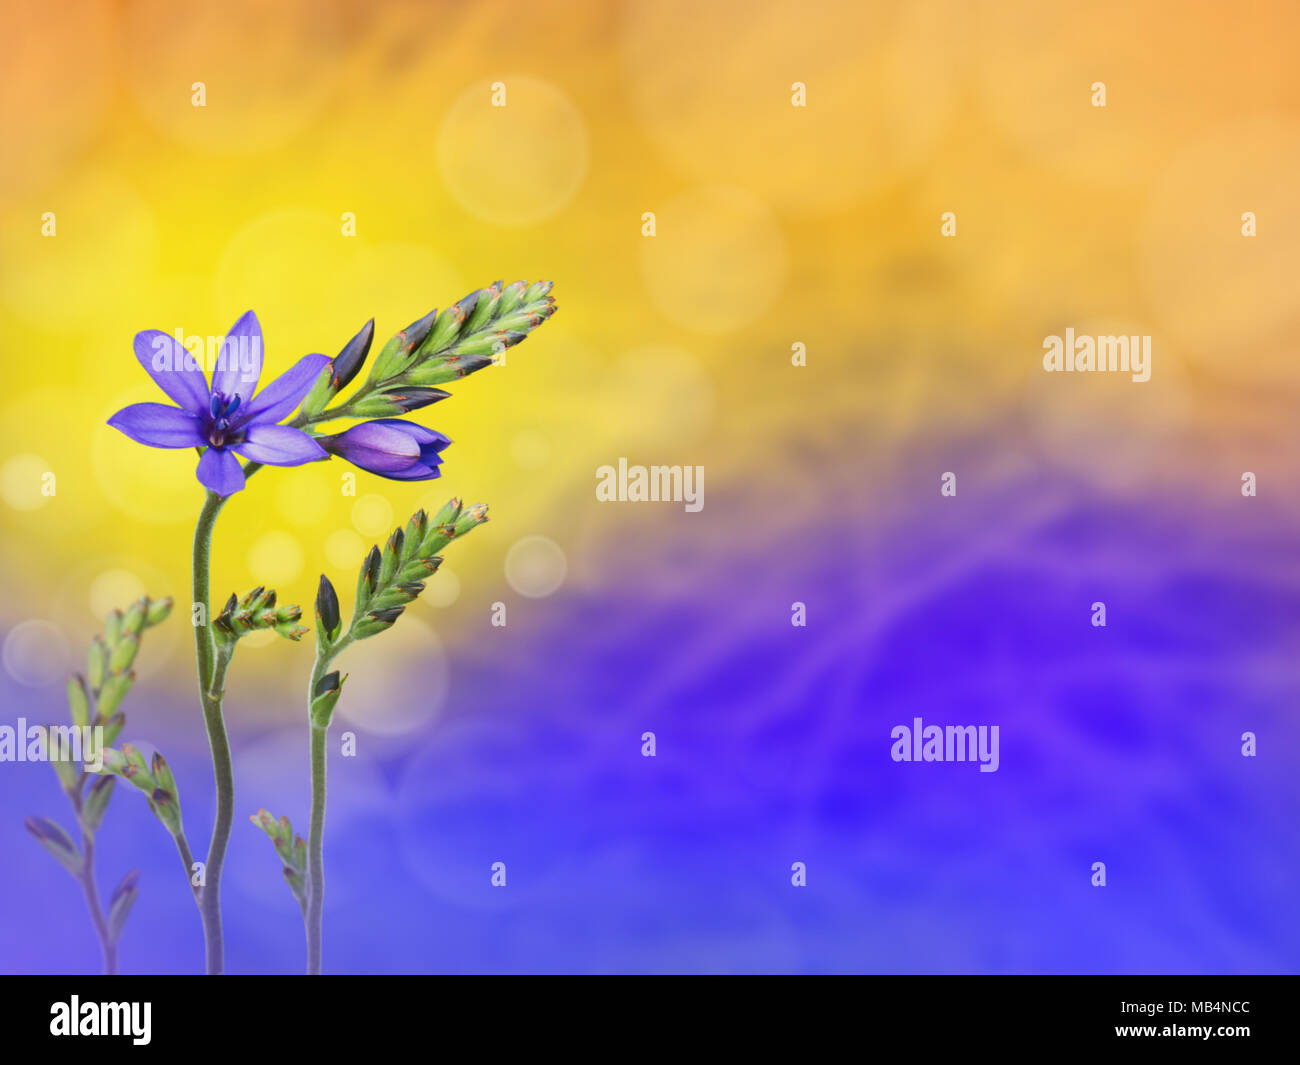 Purple freesia flowers and buds on the blue yellow blurred background. Floral desktop. Stock Photo